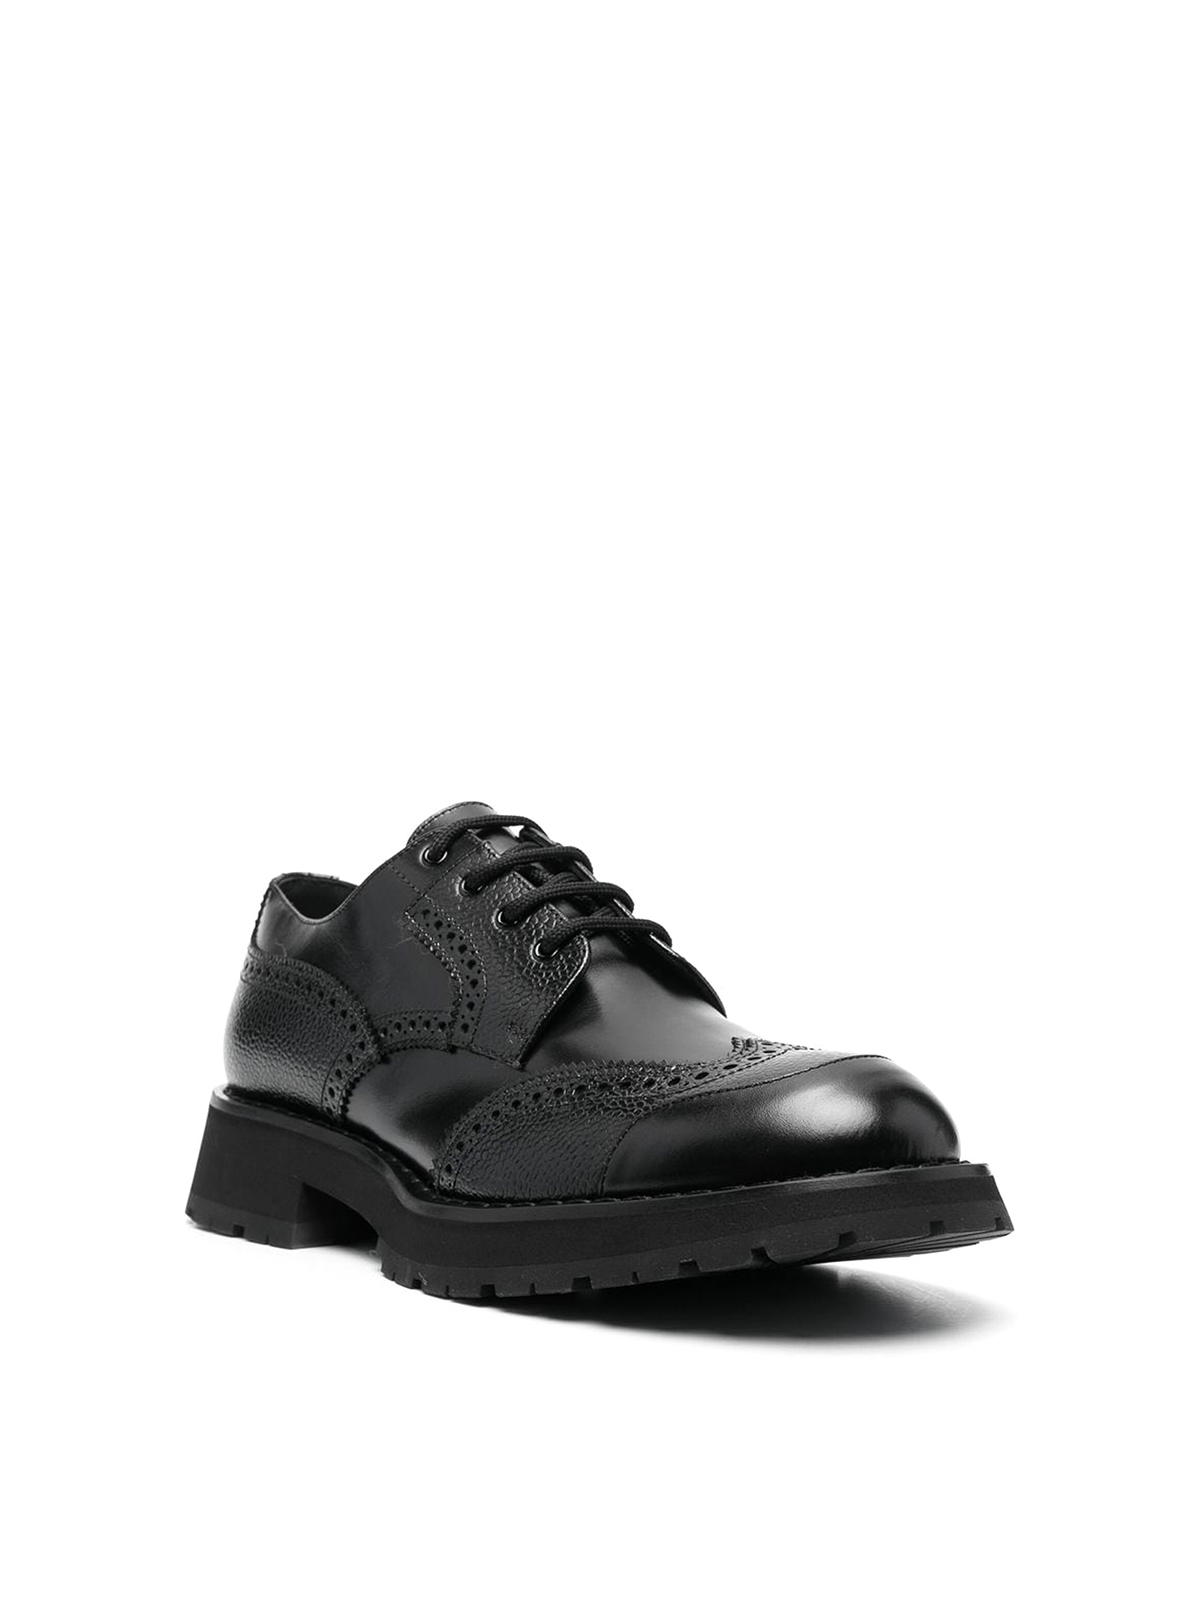 Lace-ups shoes Alexander Mcqueen - Polished leather lace-up 